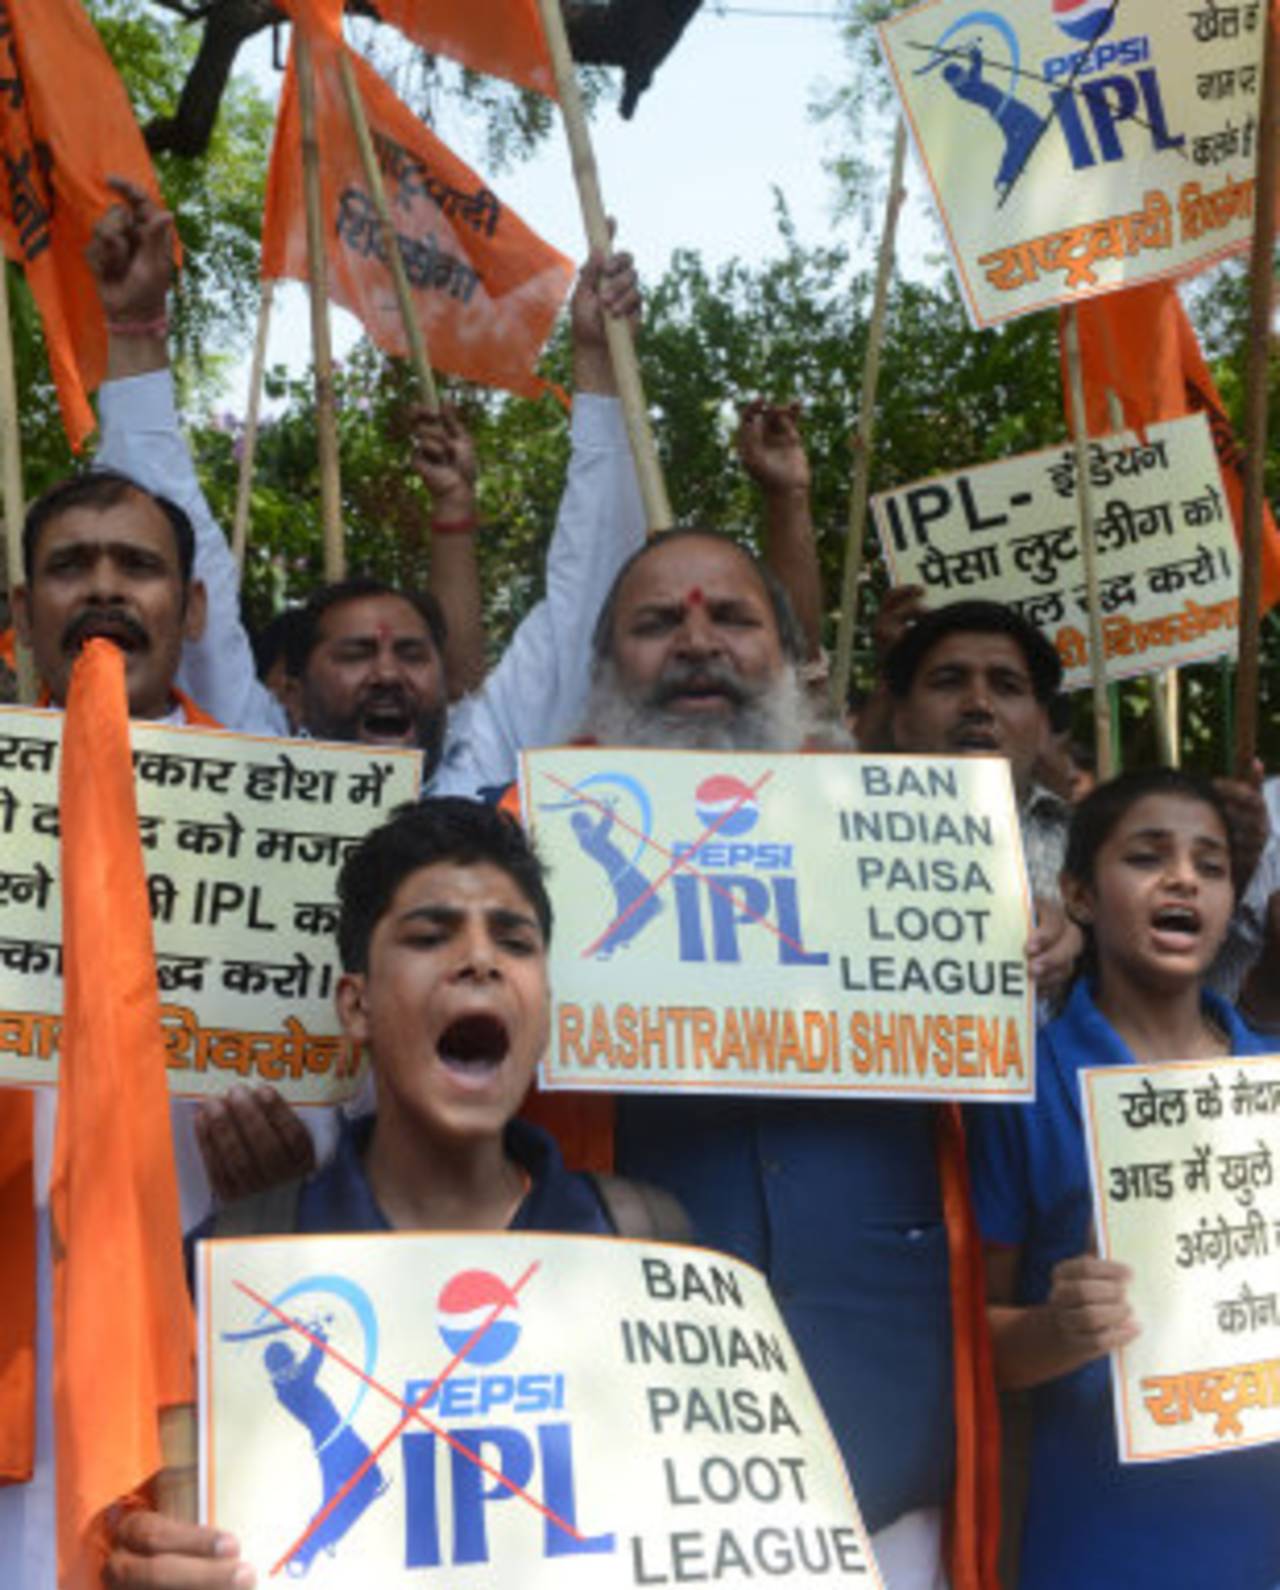 Protesters make their voices heard in the wake of the IPL spot-fixing revelations, New Delhi, May 17, 2013